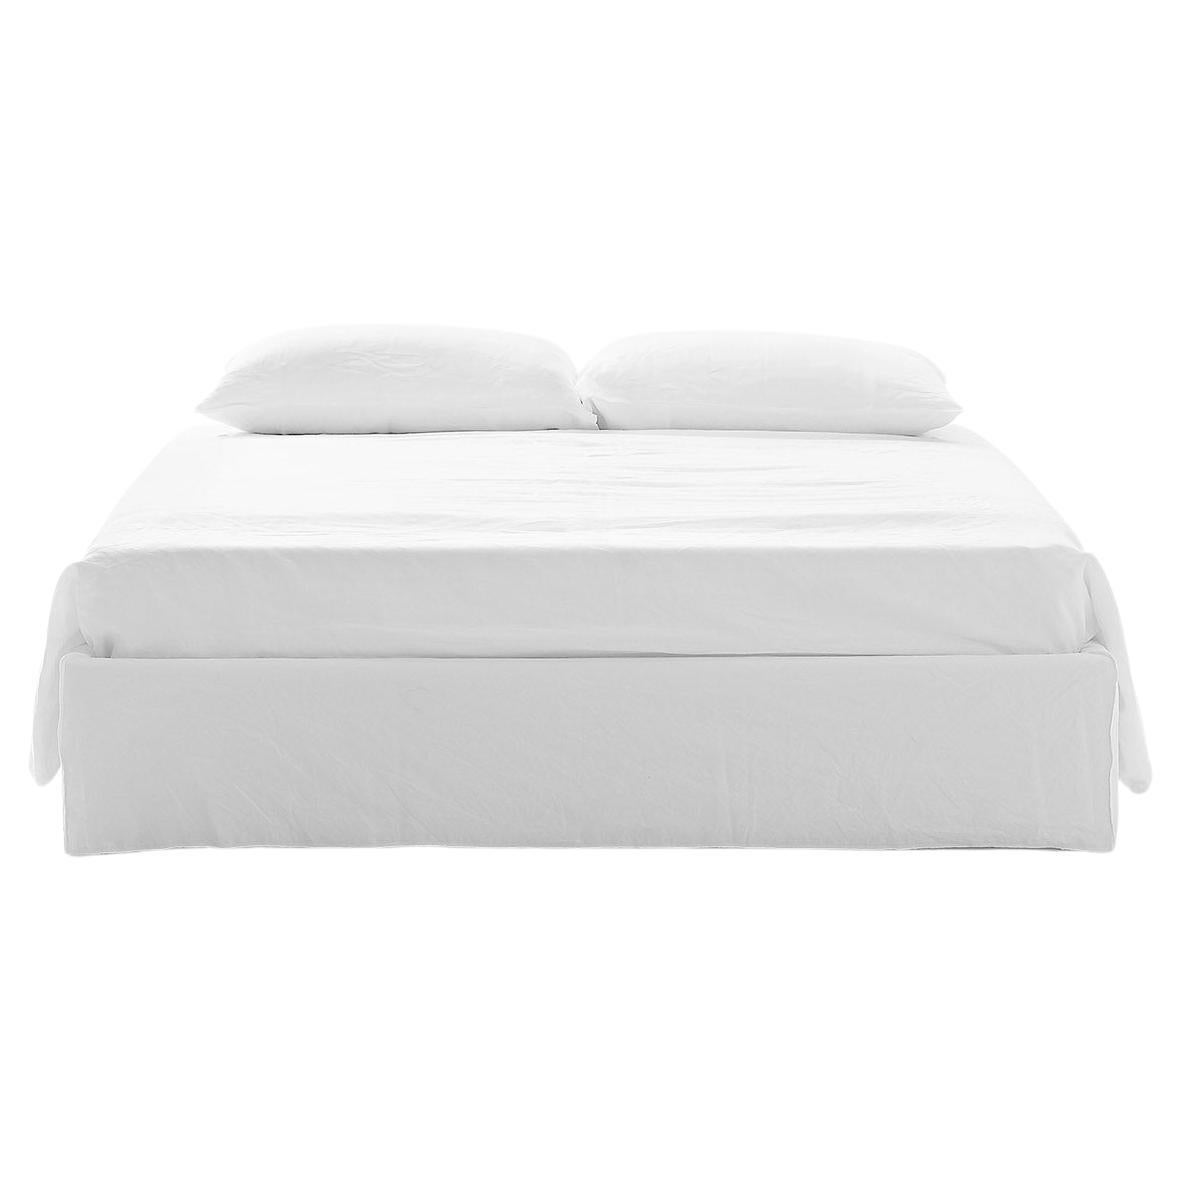 Gervasoni Ghost 80 FL Bed in White Linen Upholstery by Paola Navone For Sale